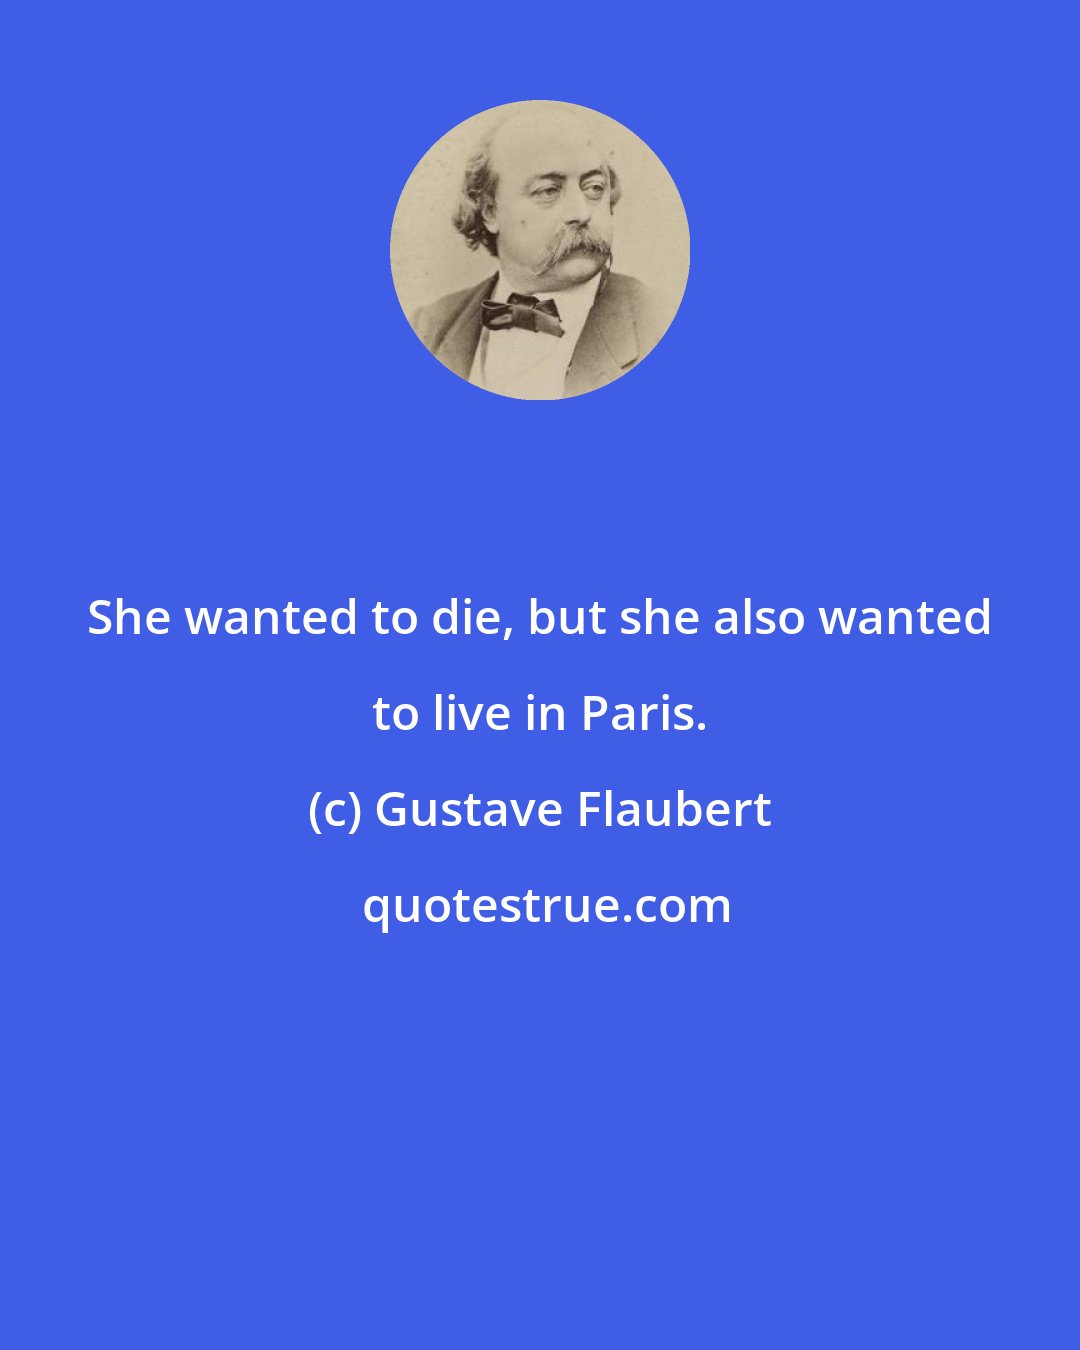 Gustave Flaubert: She wanted to die, but she also wanted to live in Paris.